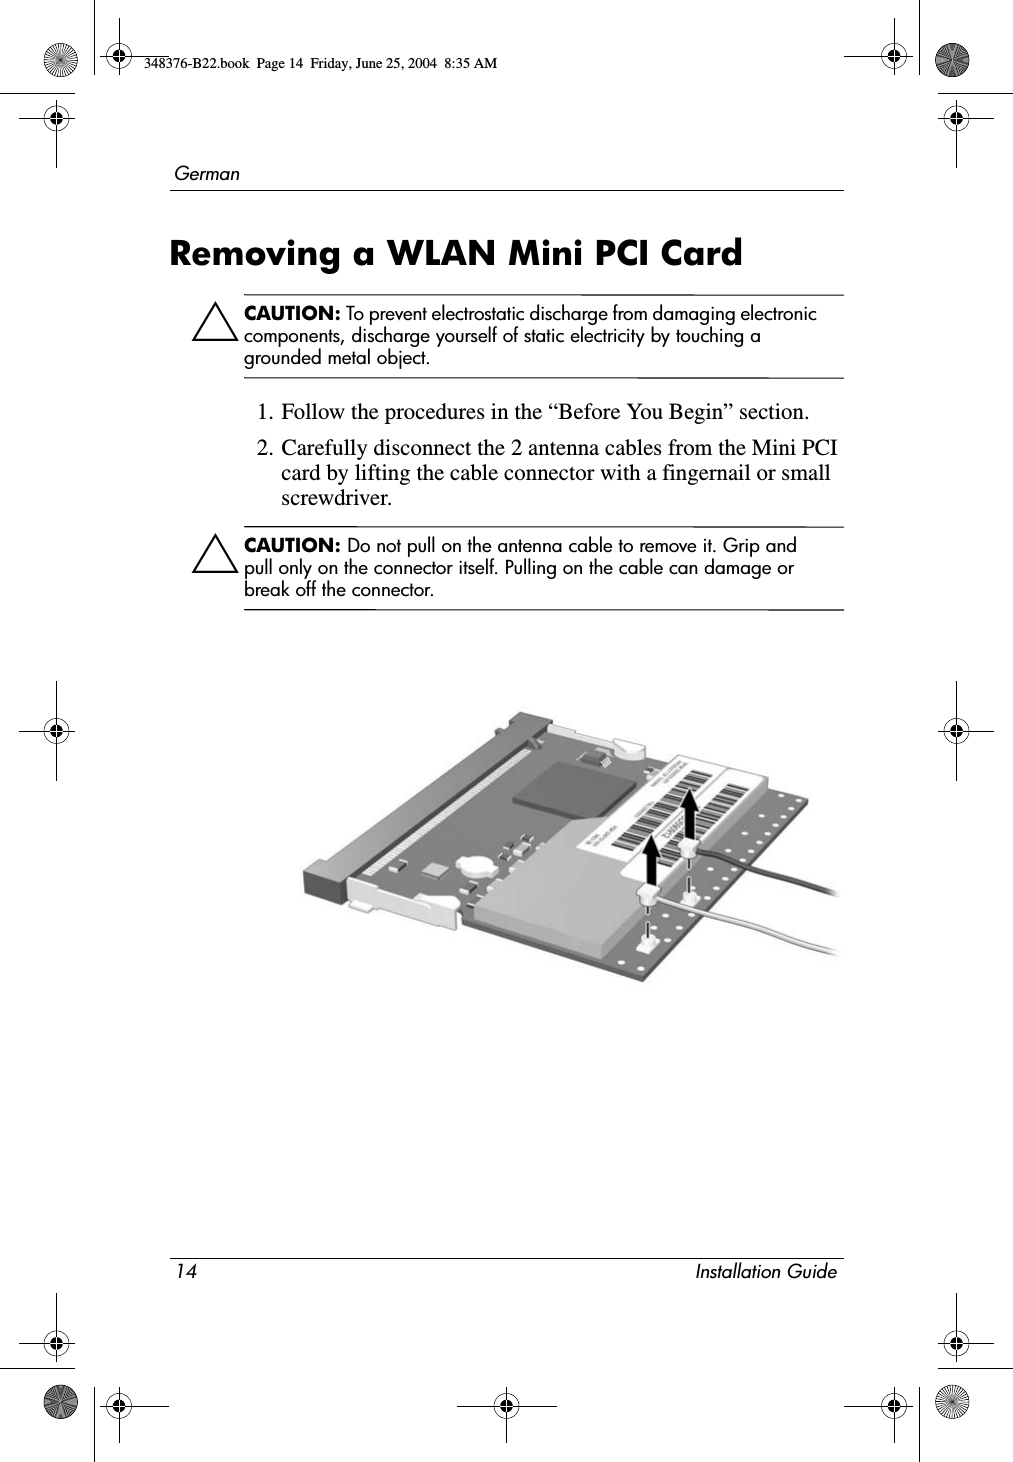 14 Installation GuideGermanRemoving a WLAN Mini PCI CardÄCAUTION: To prevent electrostatic discharge from damaging electronic components, discharge yourself of static electricity by touching a grounded metal object.1. Follow the procedures in the “Before You Begin” section.2. Carefully disconnect the 2 antenna cables from the Mini PCI card by lifting the cable connector with a fingernail or small screwdriver.ÄCAUTION: Do not pull on the antenna cable to remove it. Grip and pull only on the connector itself. Pulling on the cable can damage or break off the connector.348376-B22.book  Page 14  Friday, June 25, 2004  8:35 AM